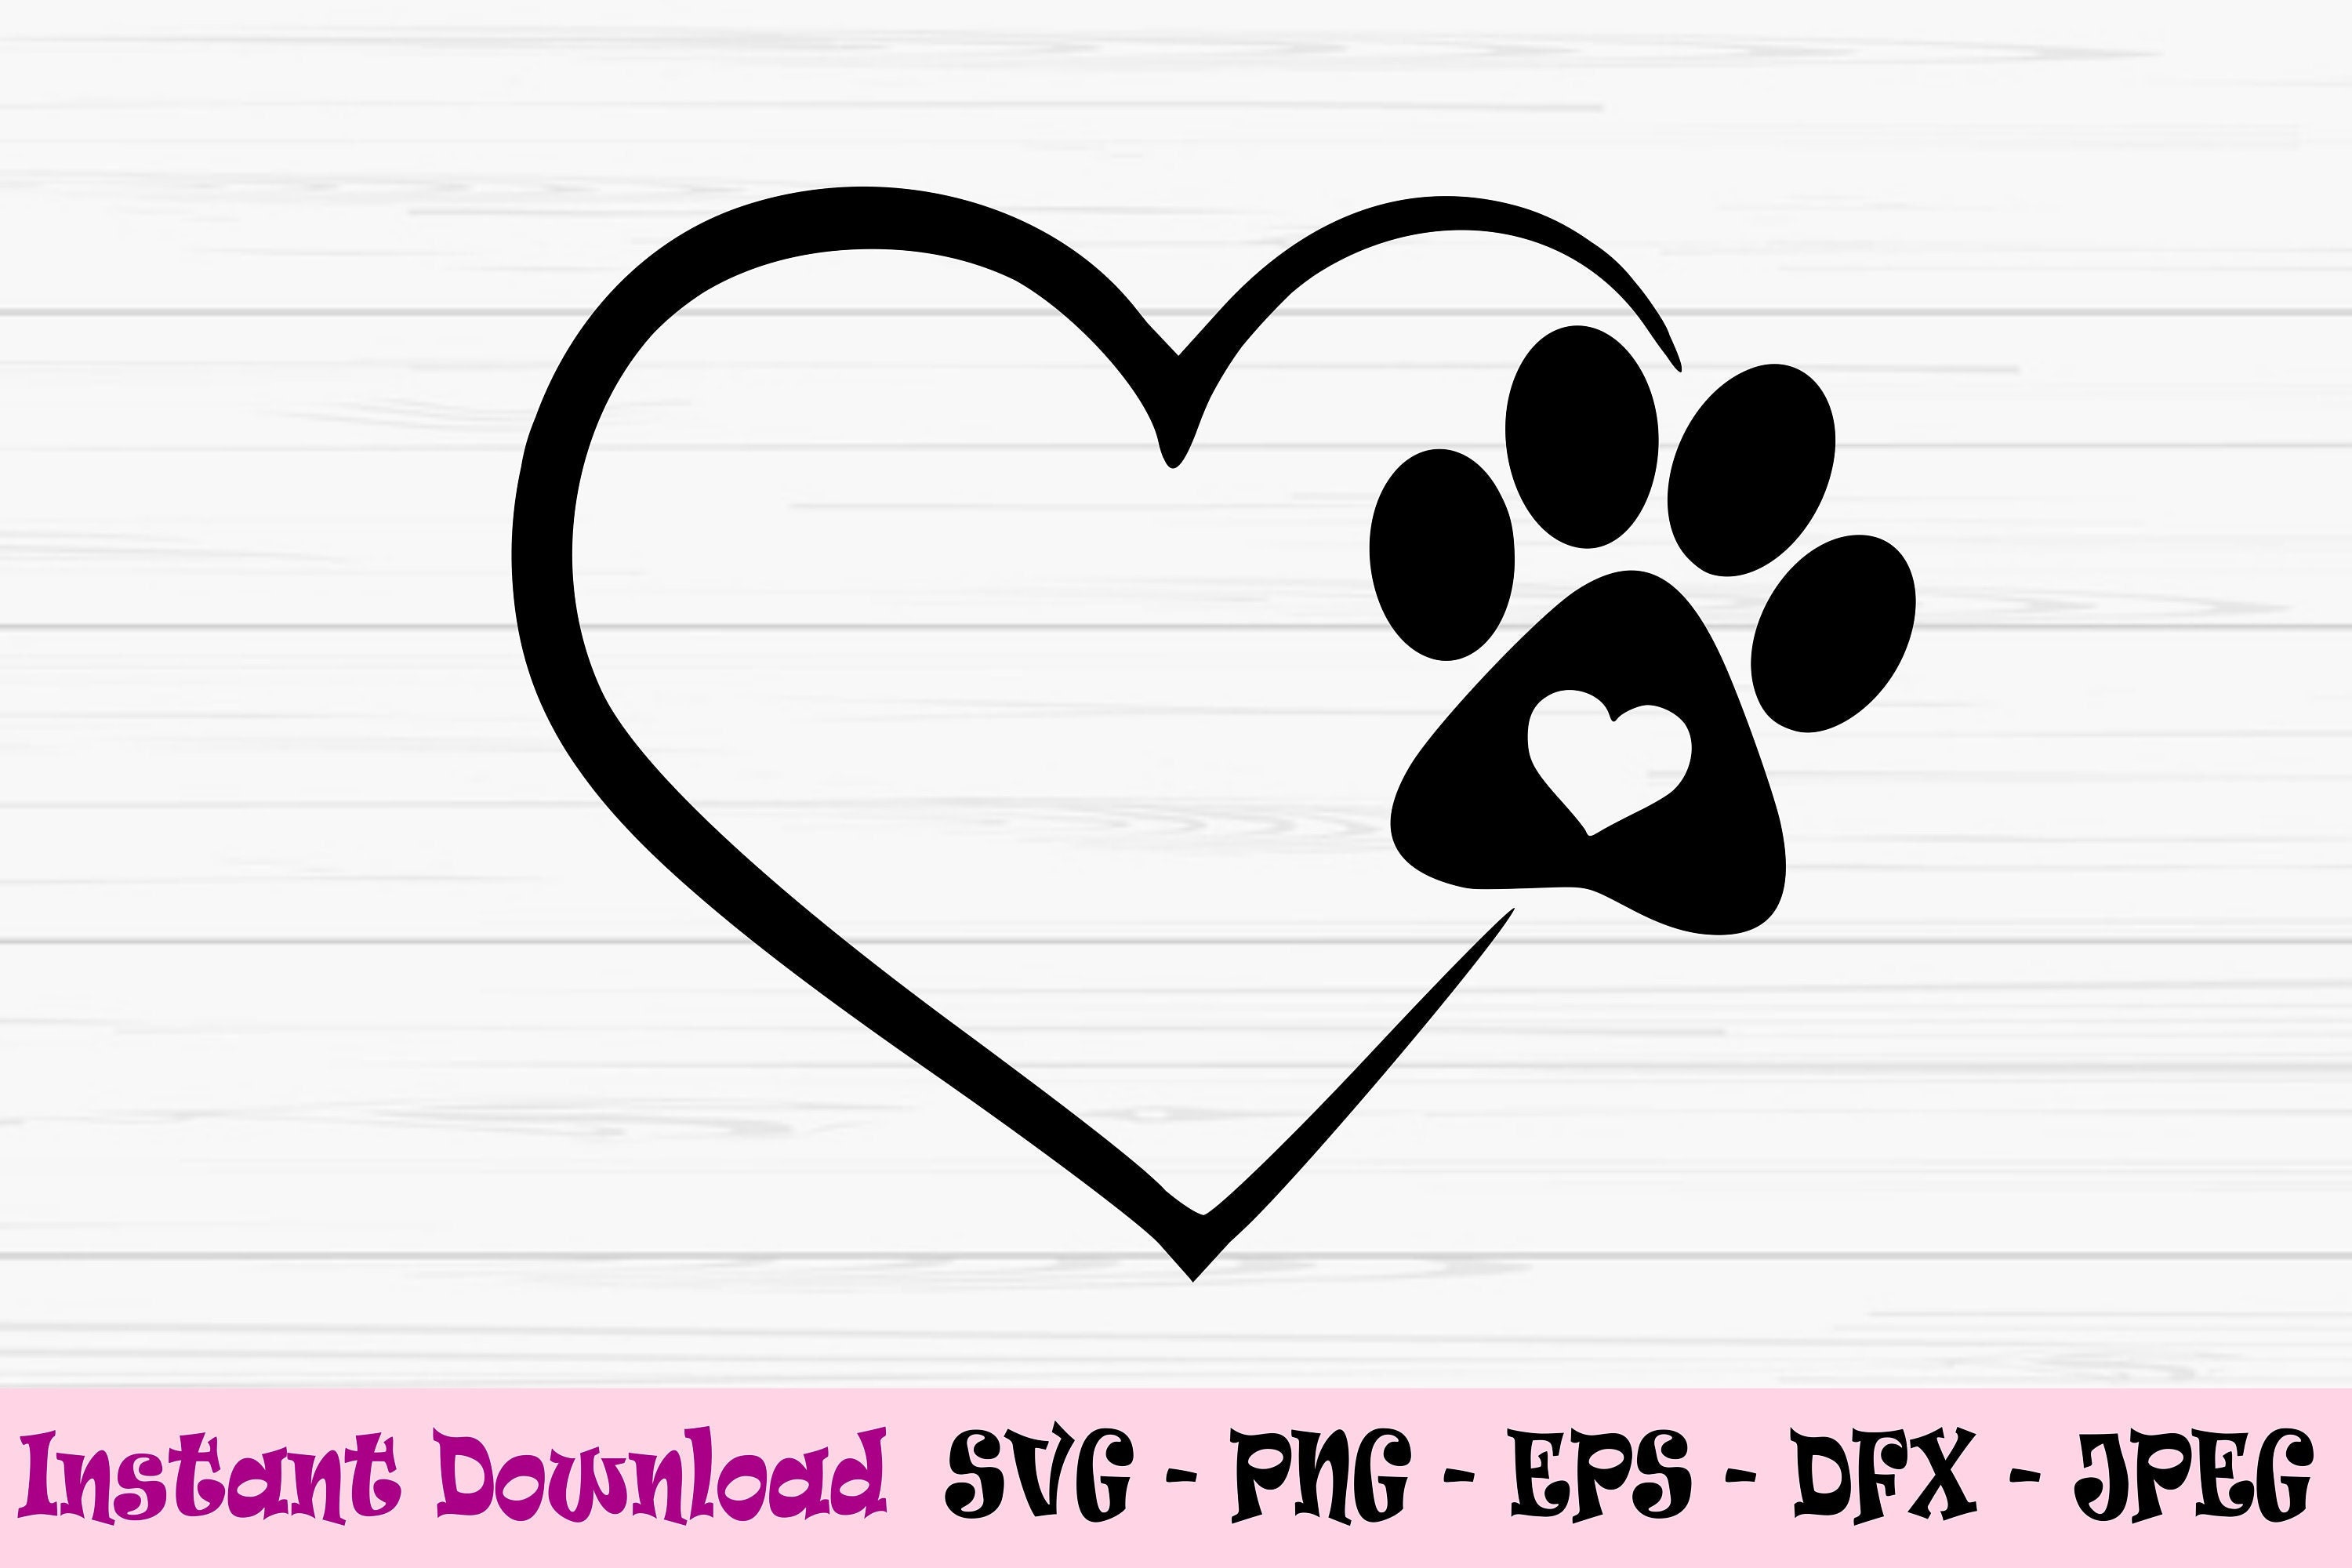 Paw SVG, Dog Paw Svg, Paw Print Outline, Paw silhouette, Paw Prints svg  png, Cat Paw Svg, Animal paw, Dog Foot Print, Dog Paw silhouette